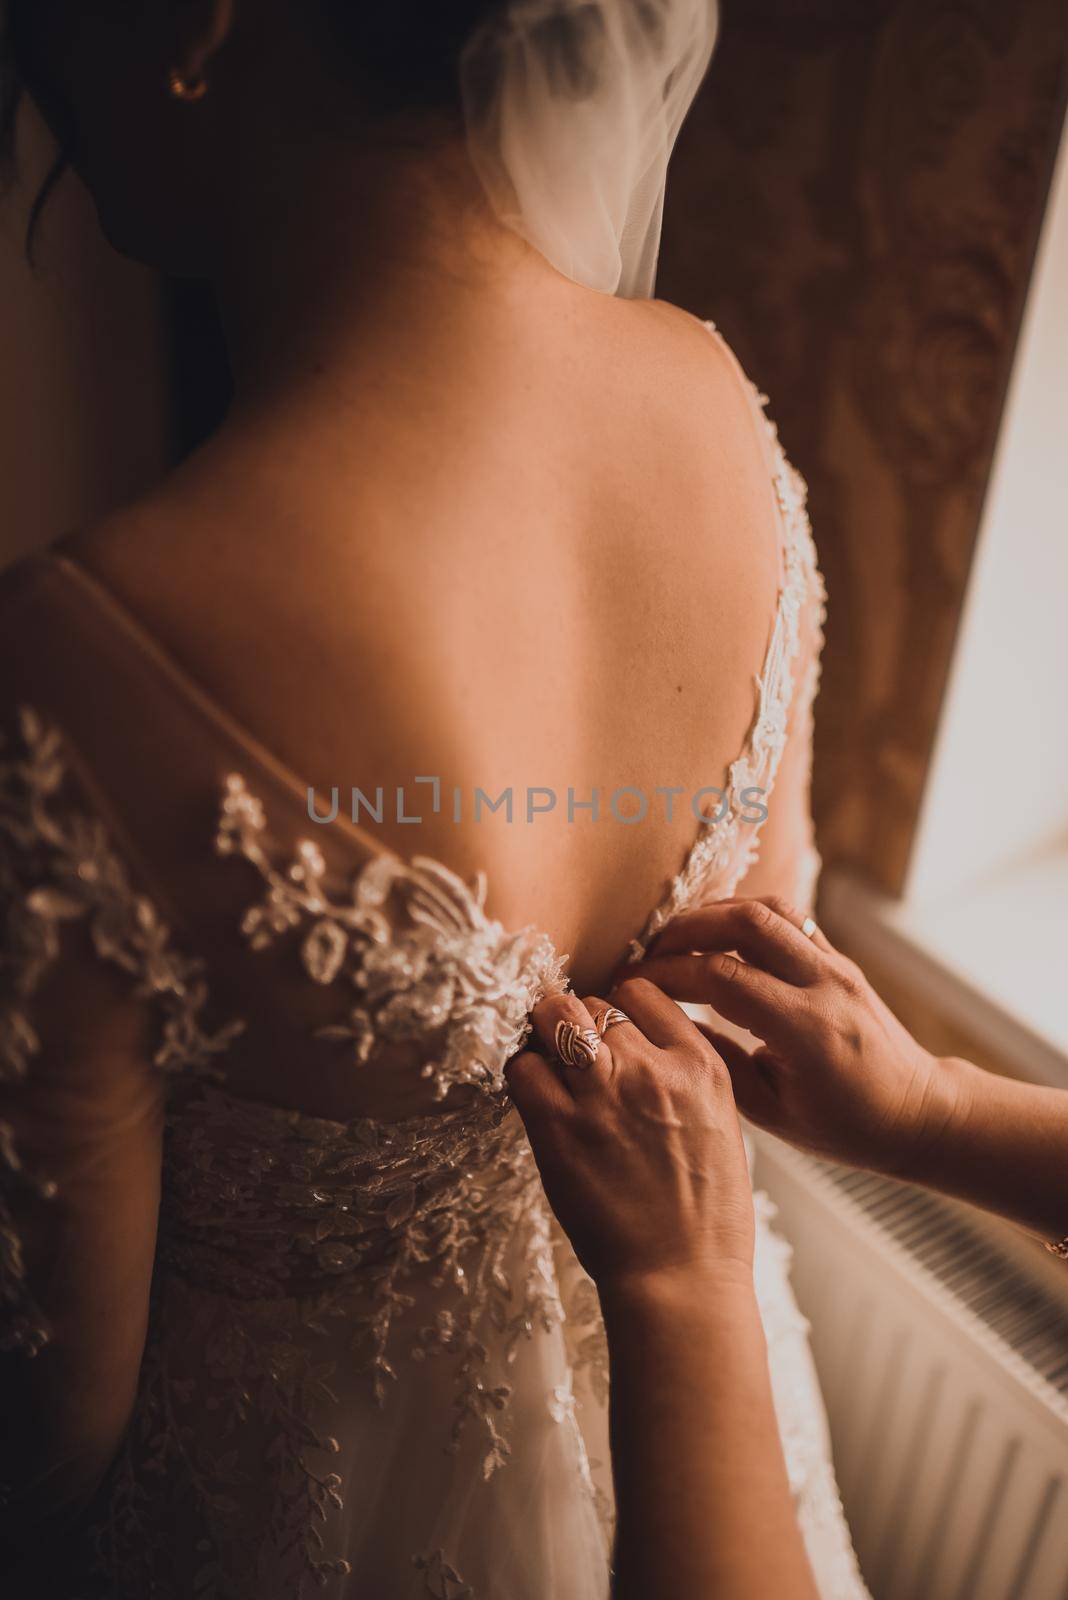 The back of the bride in a wedding dress. Mom's and woman's hands help fasten the clasps at the back.